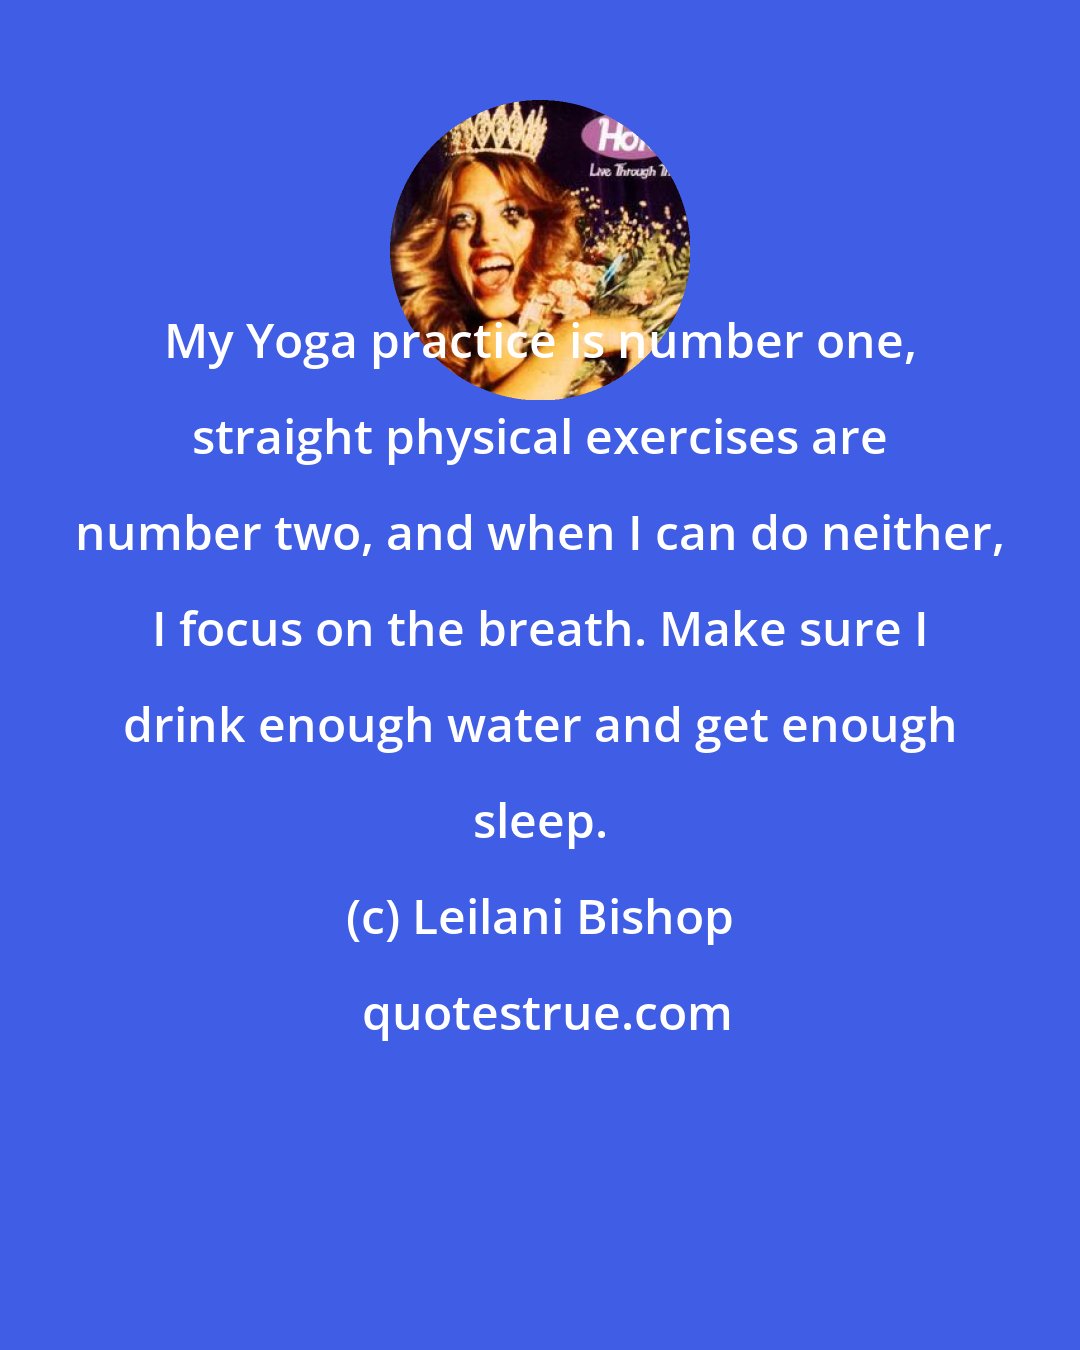 Leilani Bishop: My Yoga practice is number one, straight physical exercises are number two, and when I can do neither, I focus on the breath. Make sure I drink enough water and get enough sleep.